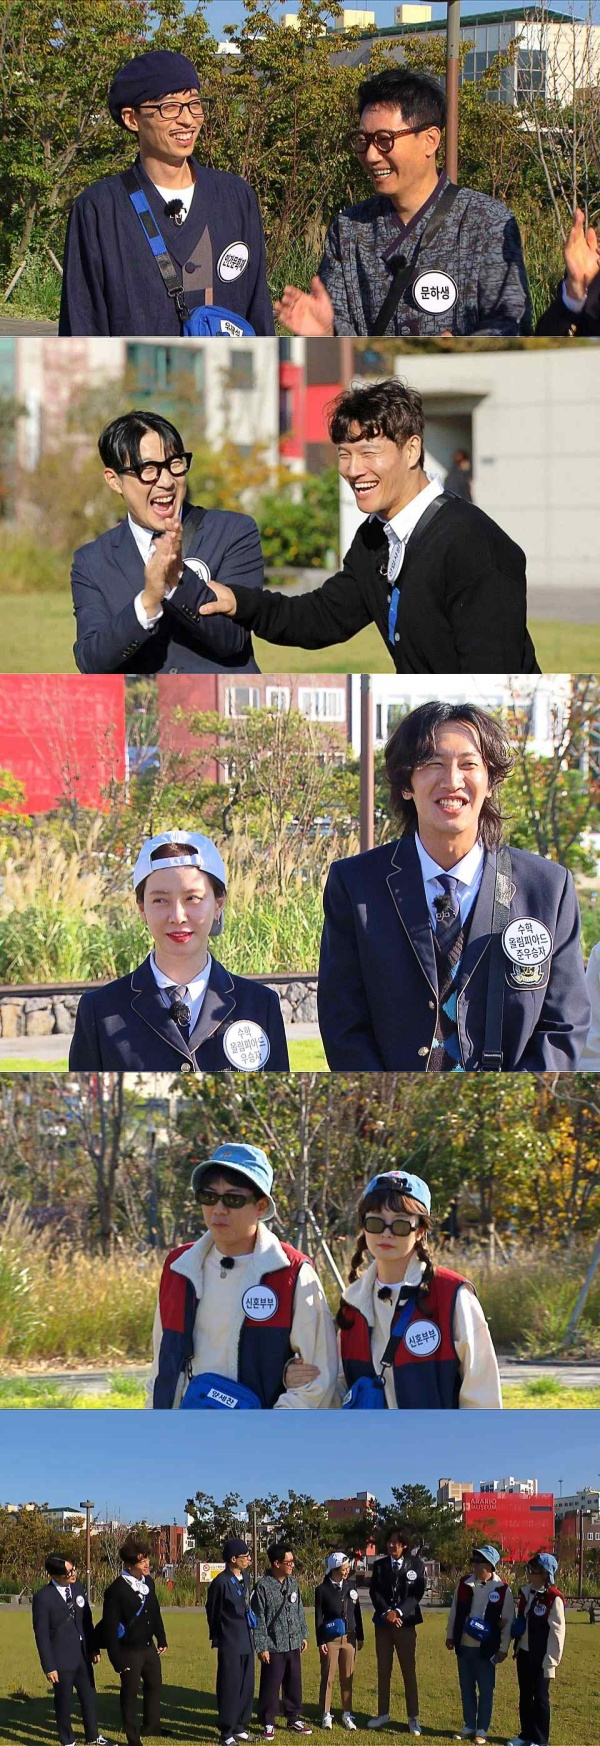 maekyung.com news teamRunning Man heralded a legend situational drama.On SBS Running Man, which will be broadcast on the afternoon of the 8th, there will be a series of events of Running Man members who left Jeju Island Package Travel.Earlier, Running Man made a big headline, including setting a character that broke the mold through the Chuseok special feature Yujinae Heritage War, which was broadcast in October, and climbing to the top of video streaming sites and major portal clip views immediately after the broadcast with the Chemi explosion situation drama.On this day, the priest Chemie of Human Cultural Yoo Jae-Suk, who is unknown to the identity, and Ji Suk-jin, the priest of the Gubdaggi Moon, Kim Jong-kook, Super Rookie, and Haha, From Chan and Jeon So-min, Mathematics Olympiad winner Song Ji-hyo and jun-winner Lee Kwang-soo, the character with full personality and the chemistry with the partner caught the eye.They enjoyed a great trip to the scenery and sightseeing spots of Jeju Island, touring restaurants, taking pictures of life, but there was a tension in the pleasant Travel when the super-class reversal hidden in the package Travel was revealed.Also, the first special feature of Jeju Island, which was broadcast last week, produced a lot of topics as Lee Joo-bin and Han Ji-eun, who were invited as guests, were on the portal site search terms. This week, which was also featured as Jeju Islands second special feature, also raised expectations by introducing the beautiful scenery, attractions and food of Jeju Island along with the previous-class situation drama.The identity of the previous-class situation drama and reverse package Travel, which show the 10-year breathing among members, can be seen on Running Man, which is broadcasted at 5 pm on Sunday, 8th